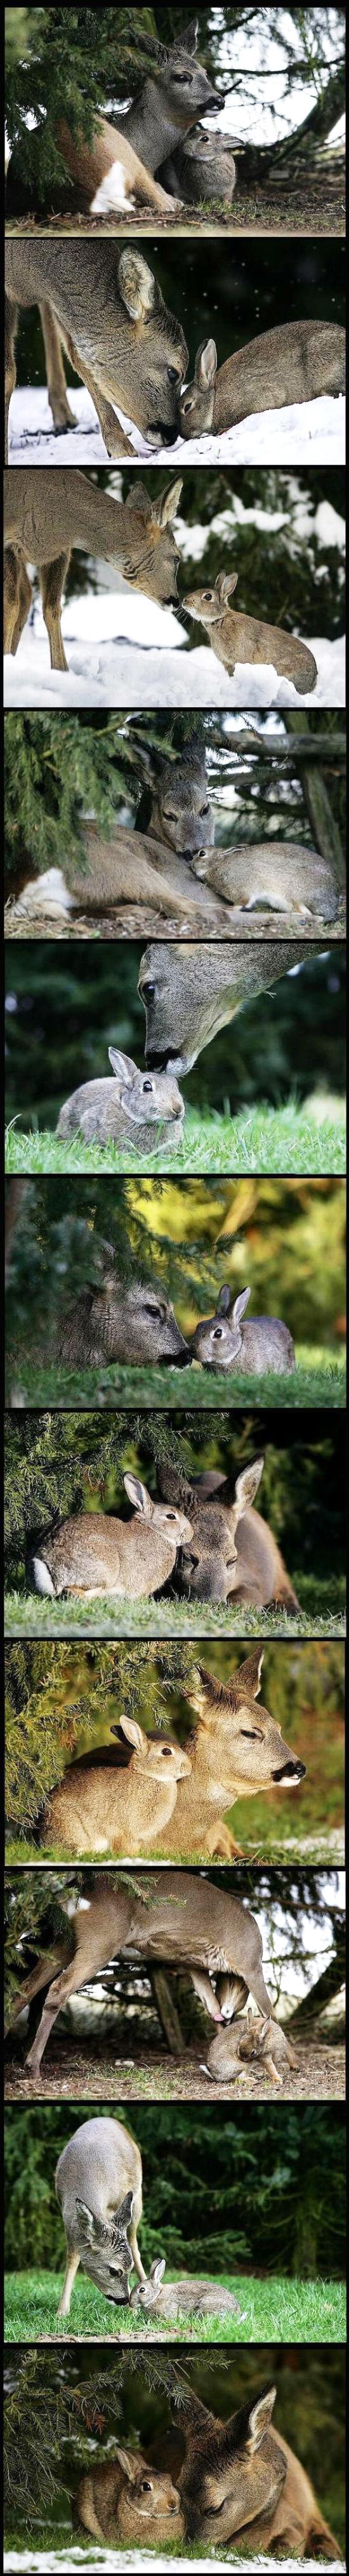 Bambi and Thumper Friends Picture